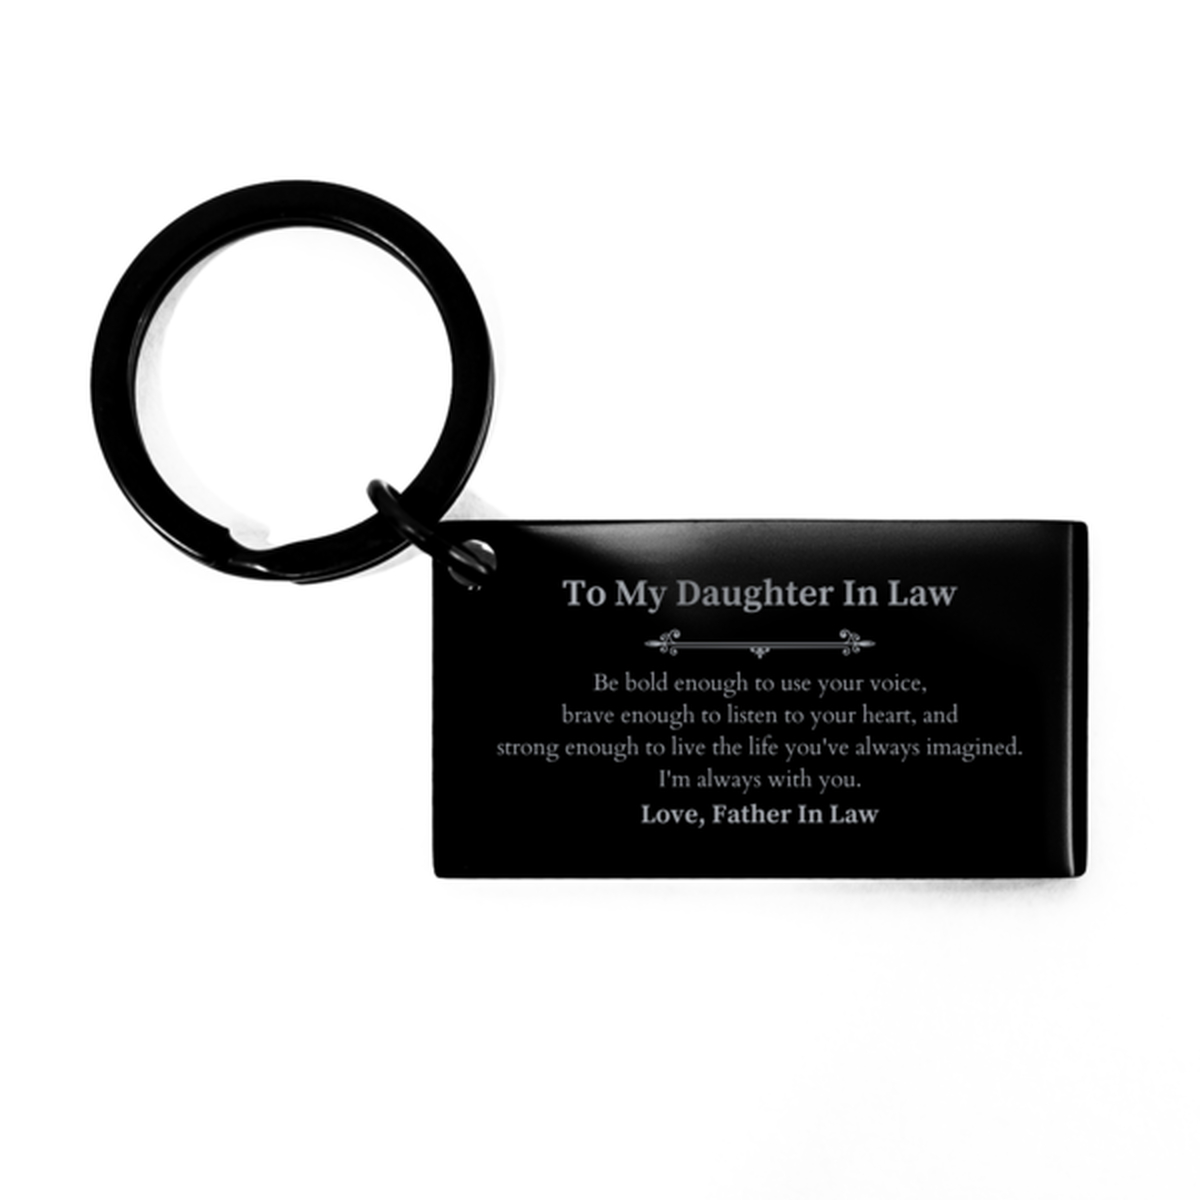 Keepsake Daughter In Law Keychain Gift Idea Graduation Christmas Birthday Daughter In Law from Father In Law, Daughter In Law Be bold enough to use your voice, brave enough to listen to your heart. Love, Father In Law